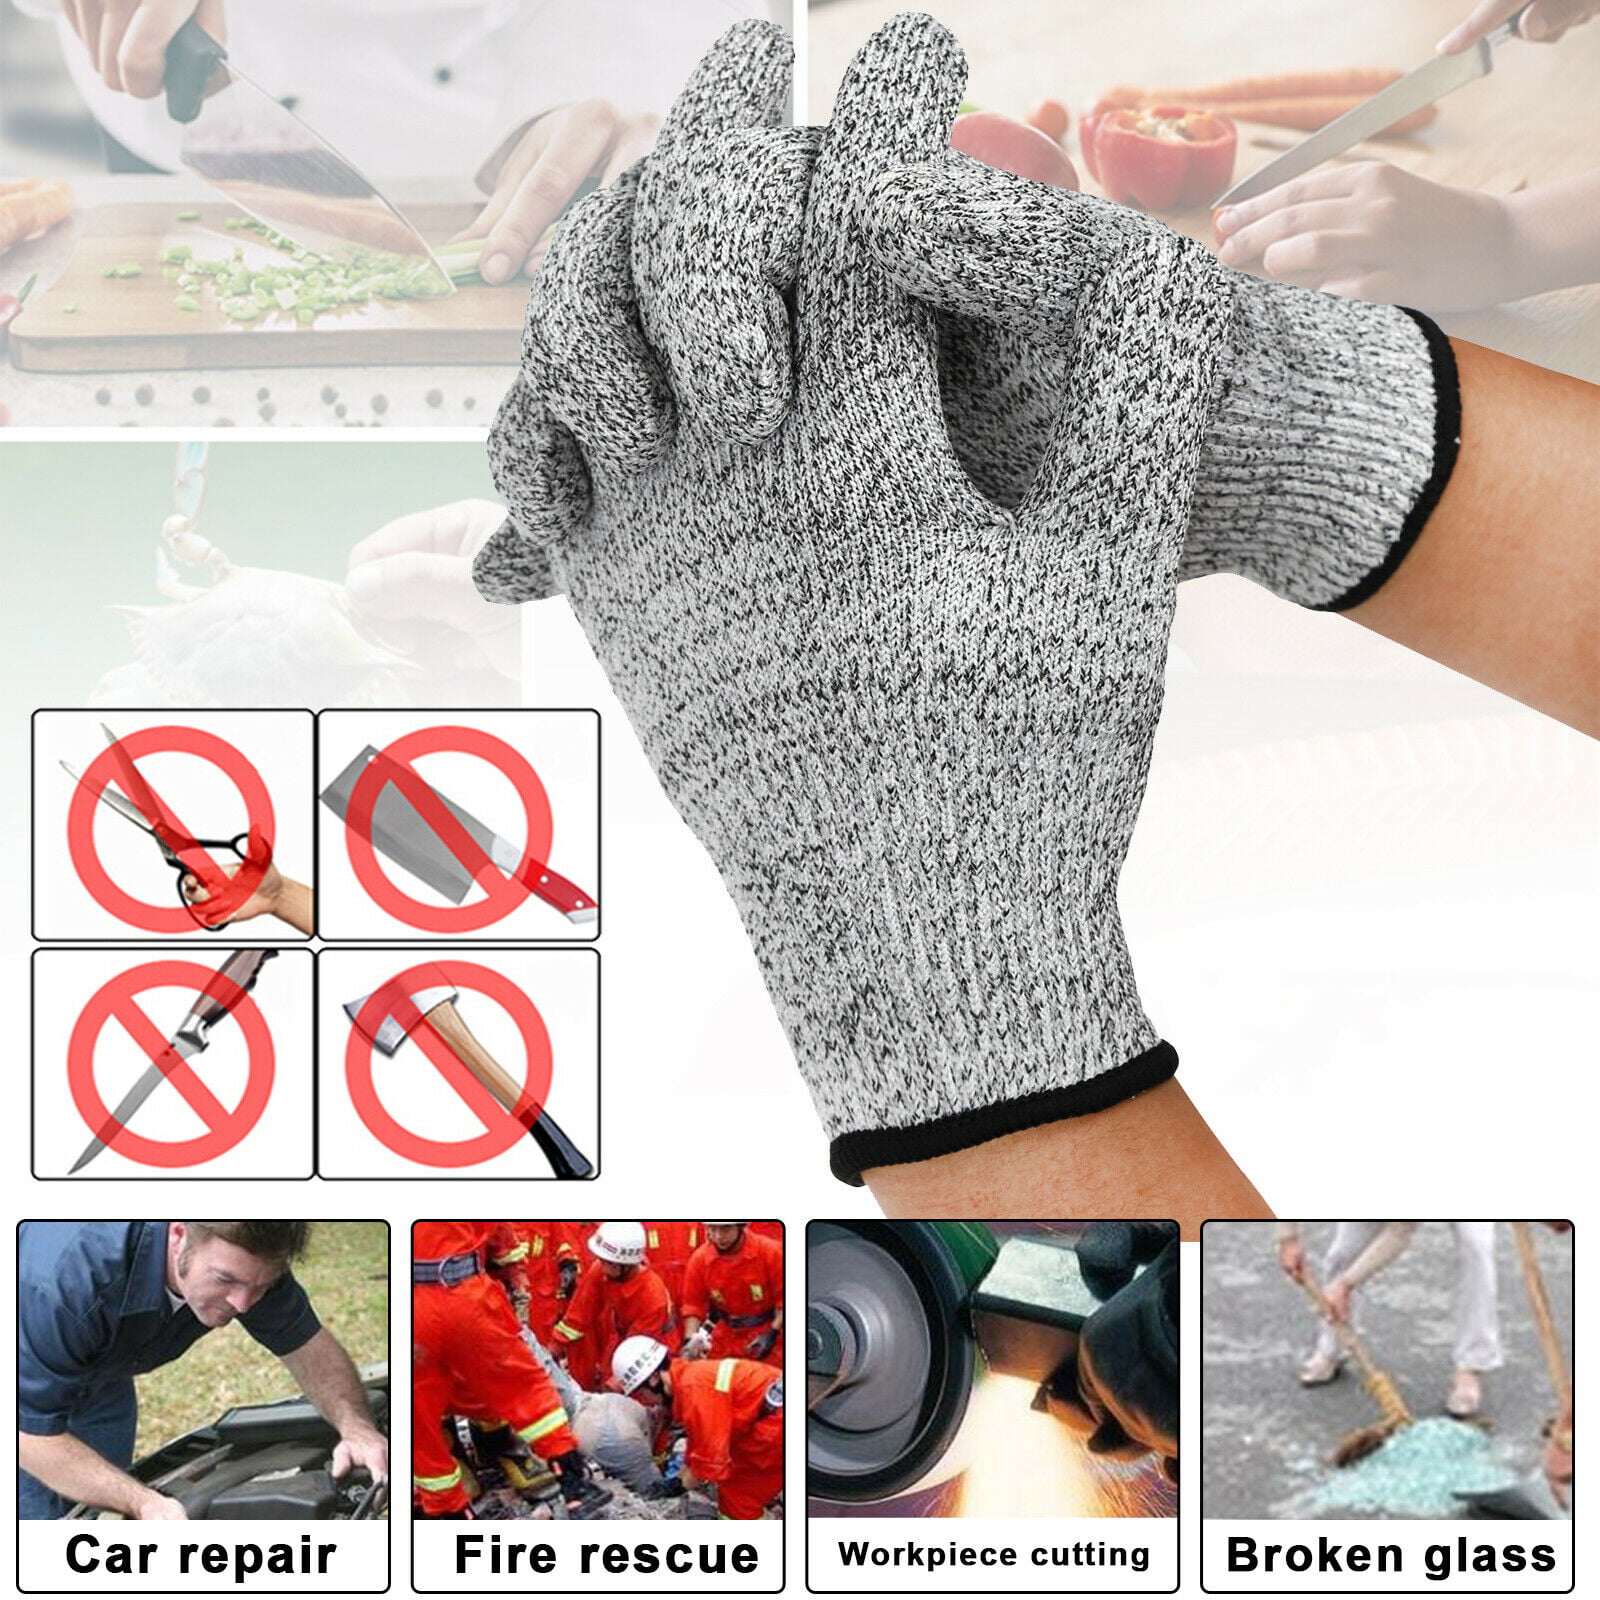 Level 5 Cut Resistant Work Gloves with Power Grip for Wood Carving  Carpentry, Glass Industry and other Constructions